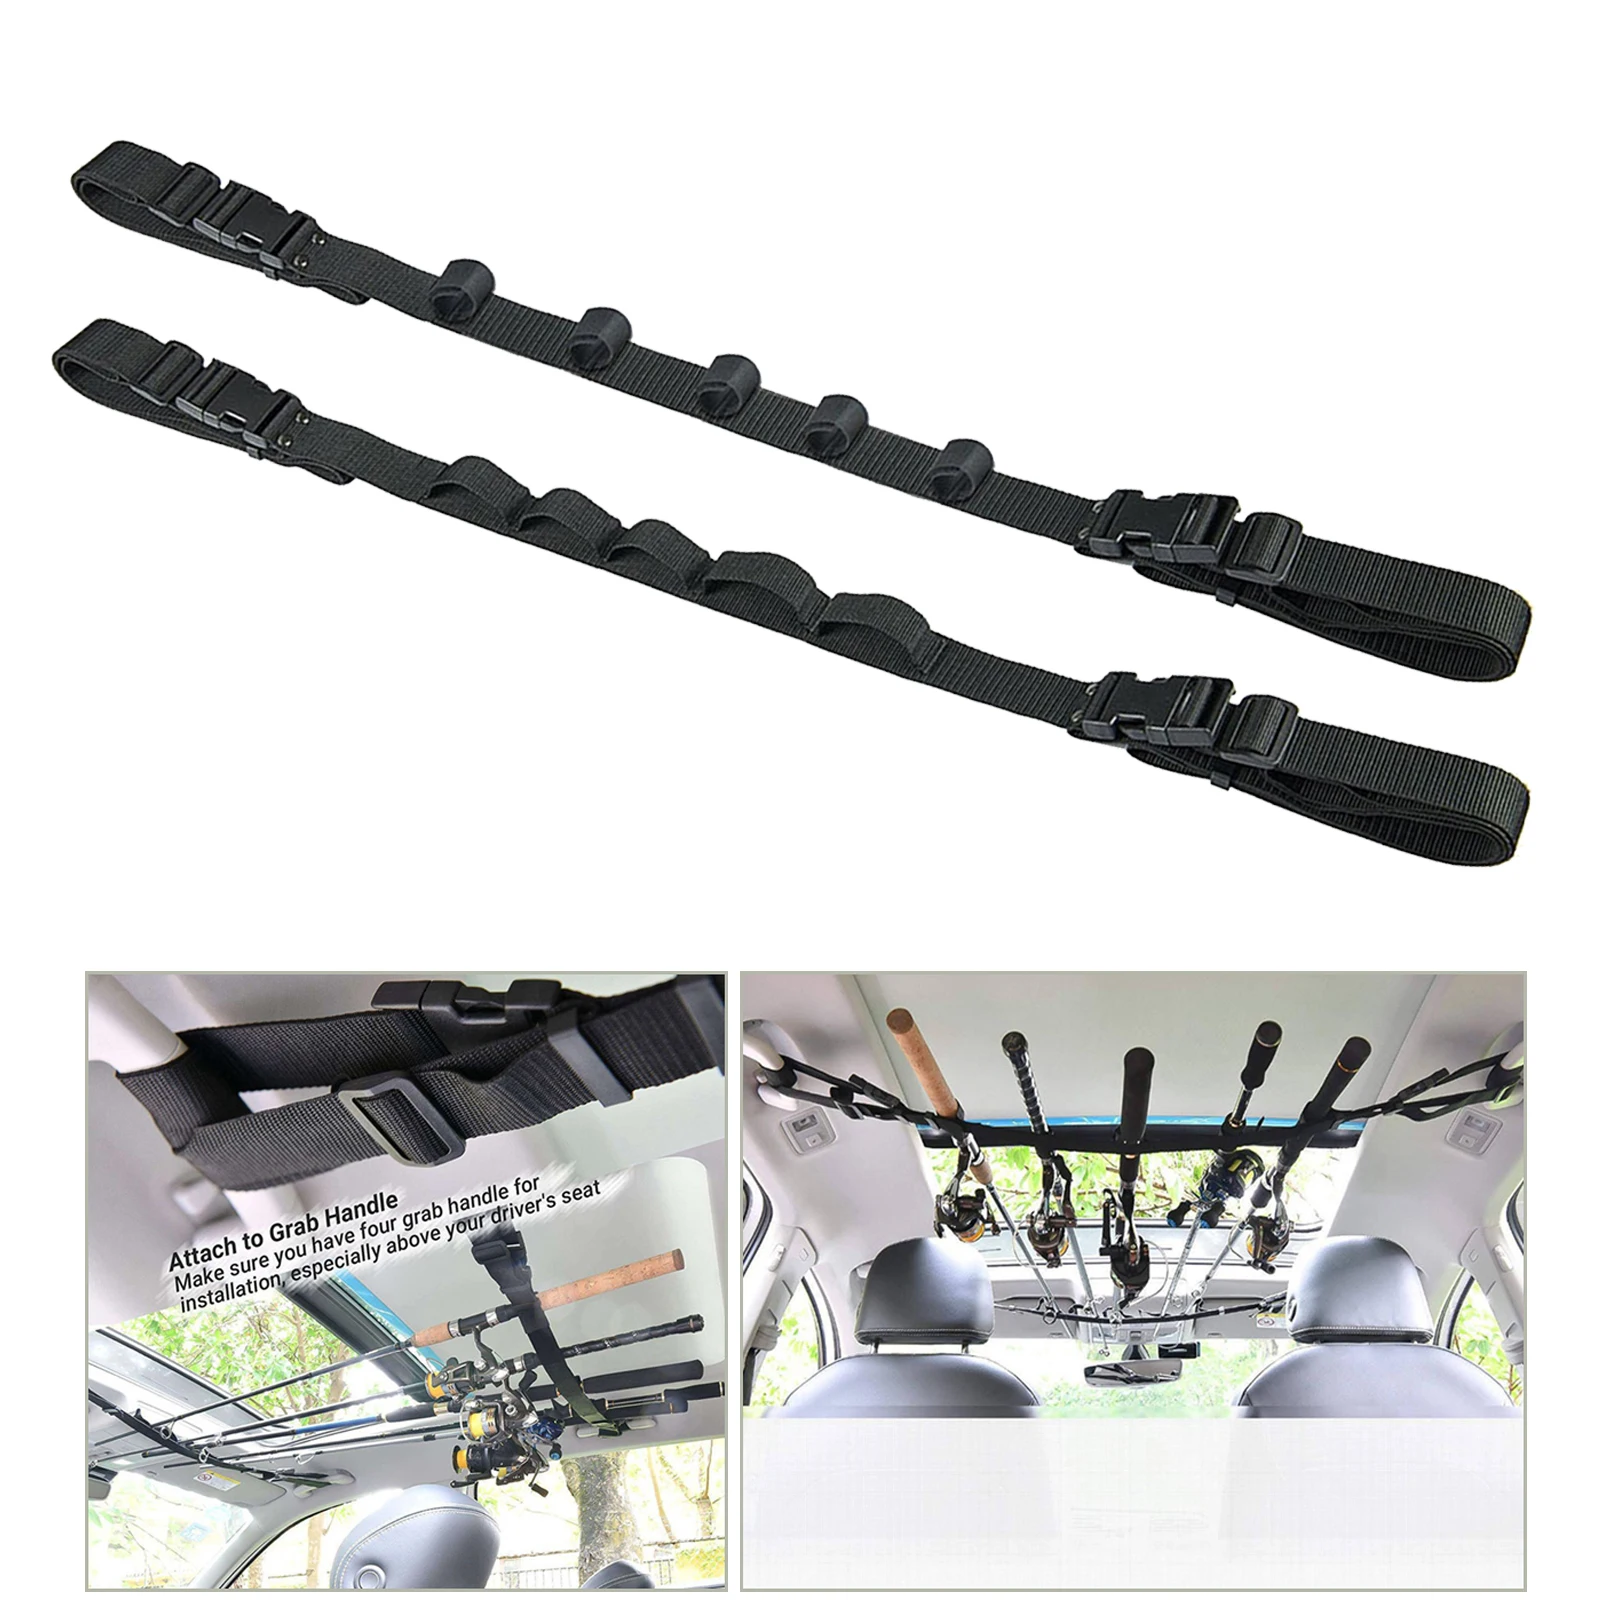 2pcs Vehicle Fishing Rod Holder, Durable Fishing Pole Carry Rack Strap Belt Carrier with Adjustable Paste Straps Scroll